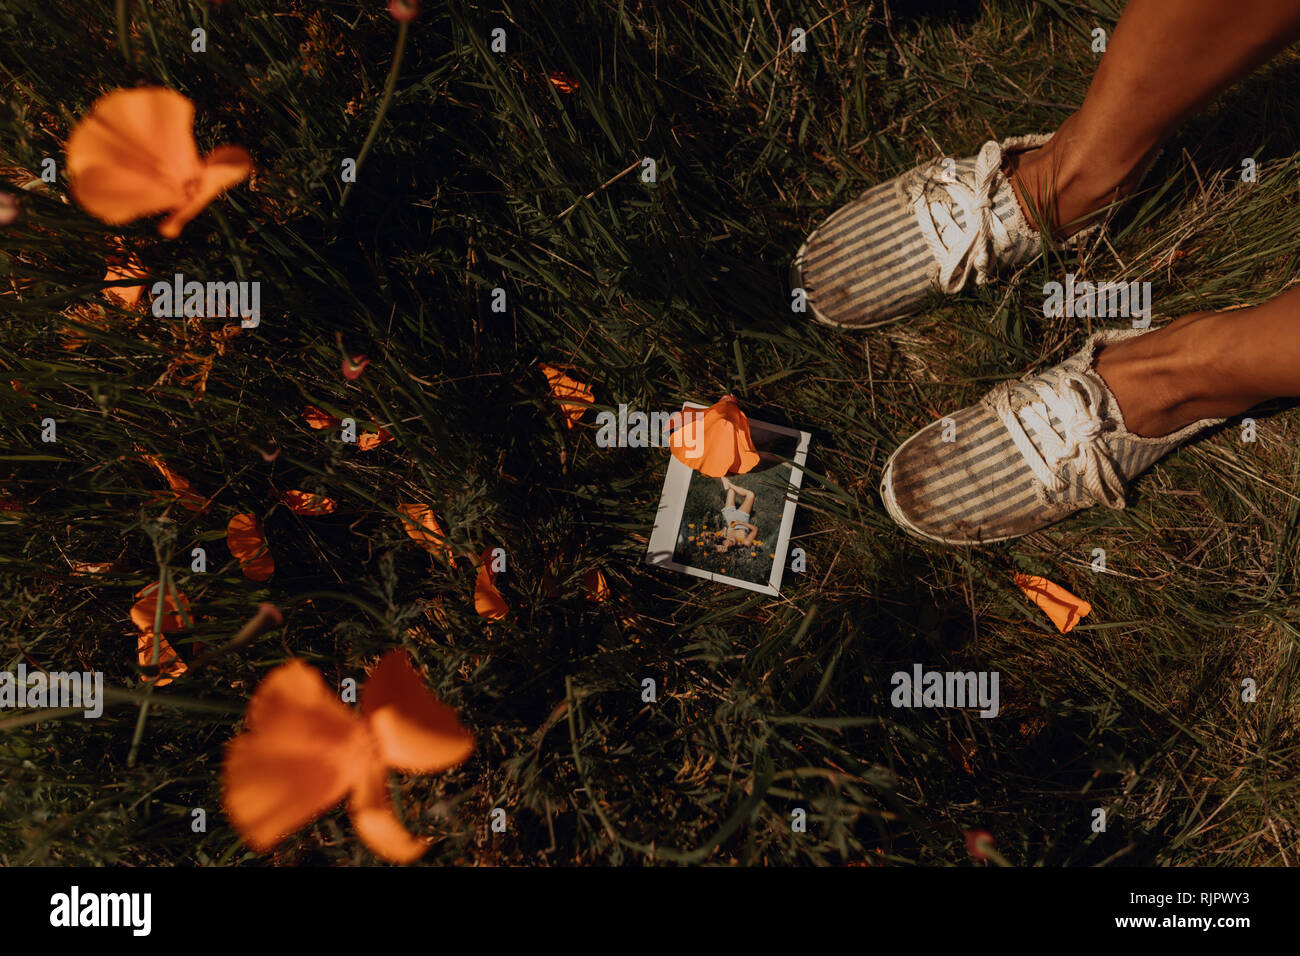 Young woman's feet by instant photo wildflower field, detail, Jalama, California, USA Stock Photo